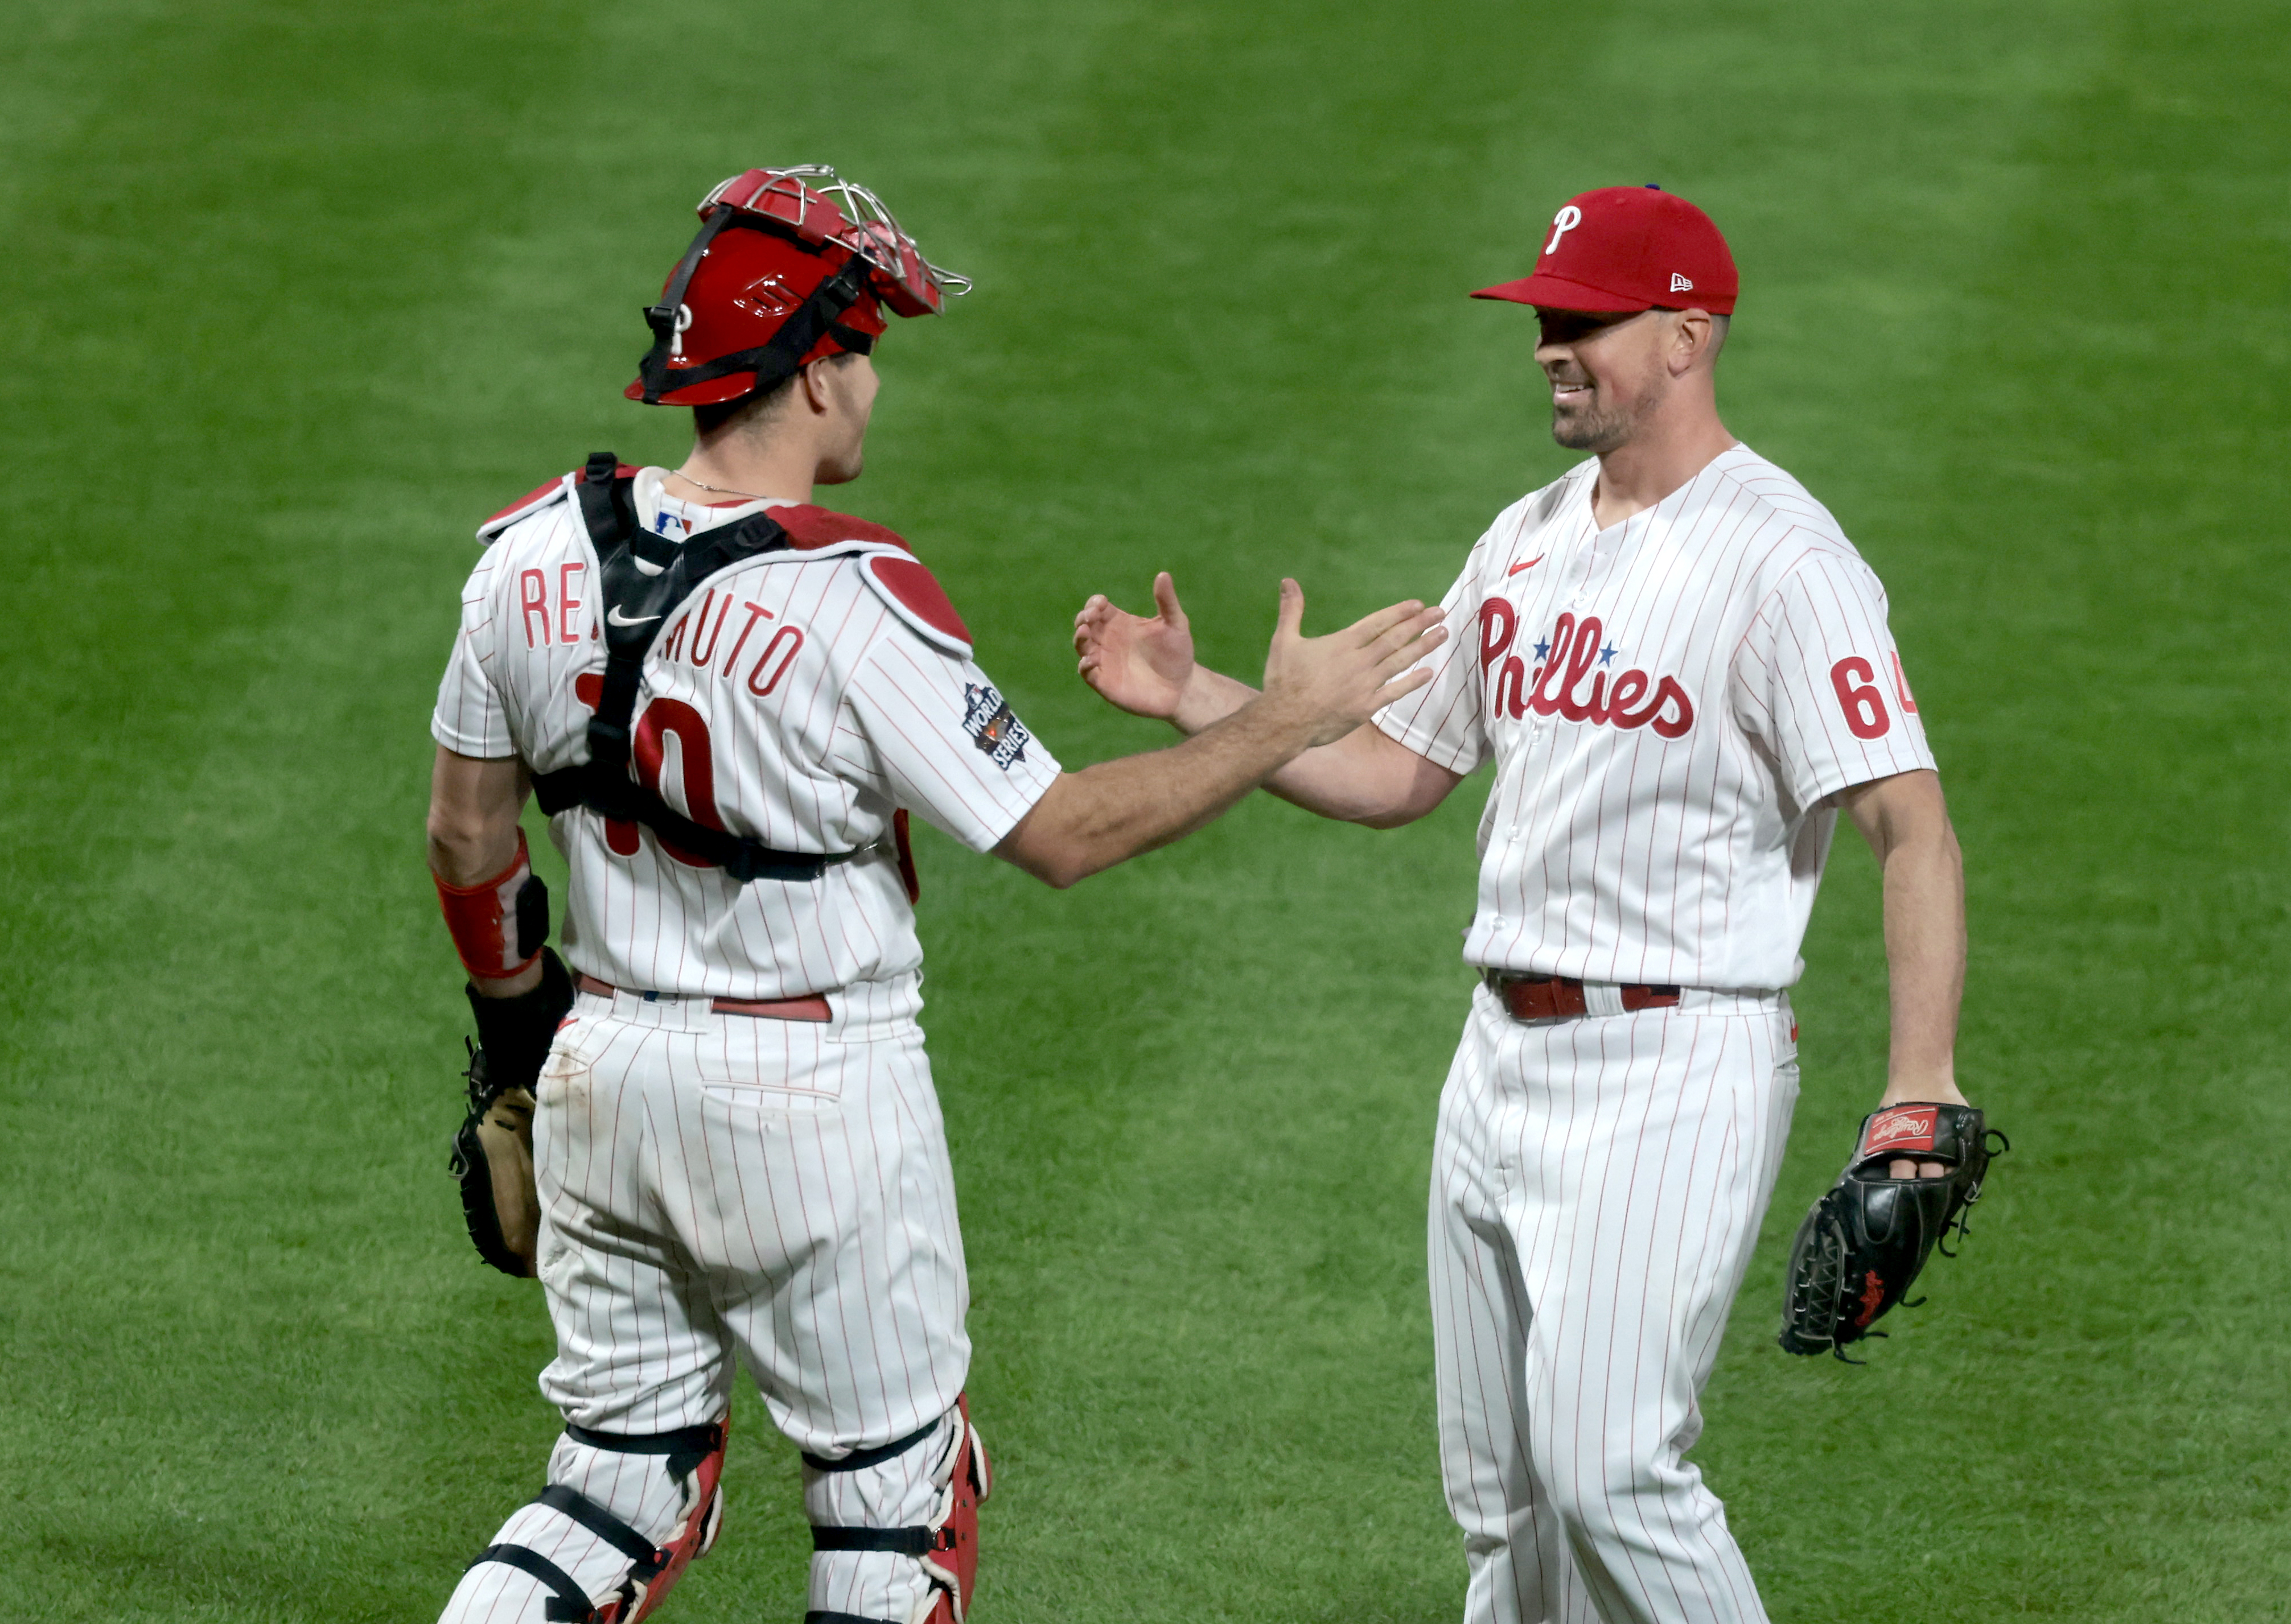 Andrew Bellatti (64) of the Philadelphia Phillies and J.T. Realmuto (10) celebrate after the final out in a 7-0 victory vs. the Houston Astros in Game 3 of the World Series at Citizens Bank Park, Tuesday, Nov. 1, 2022.